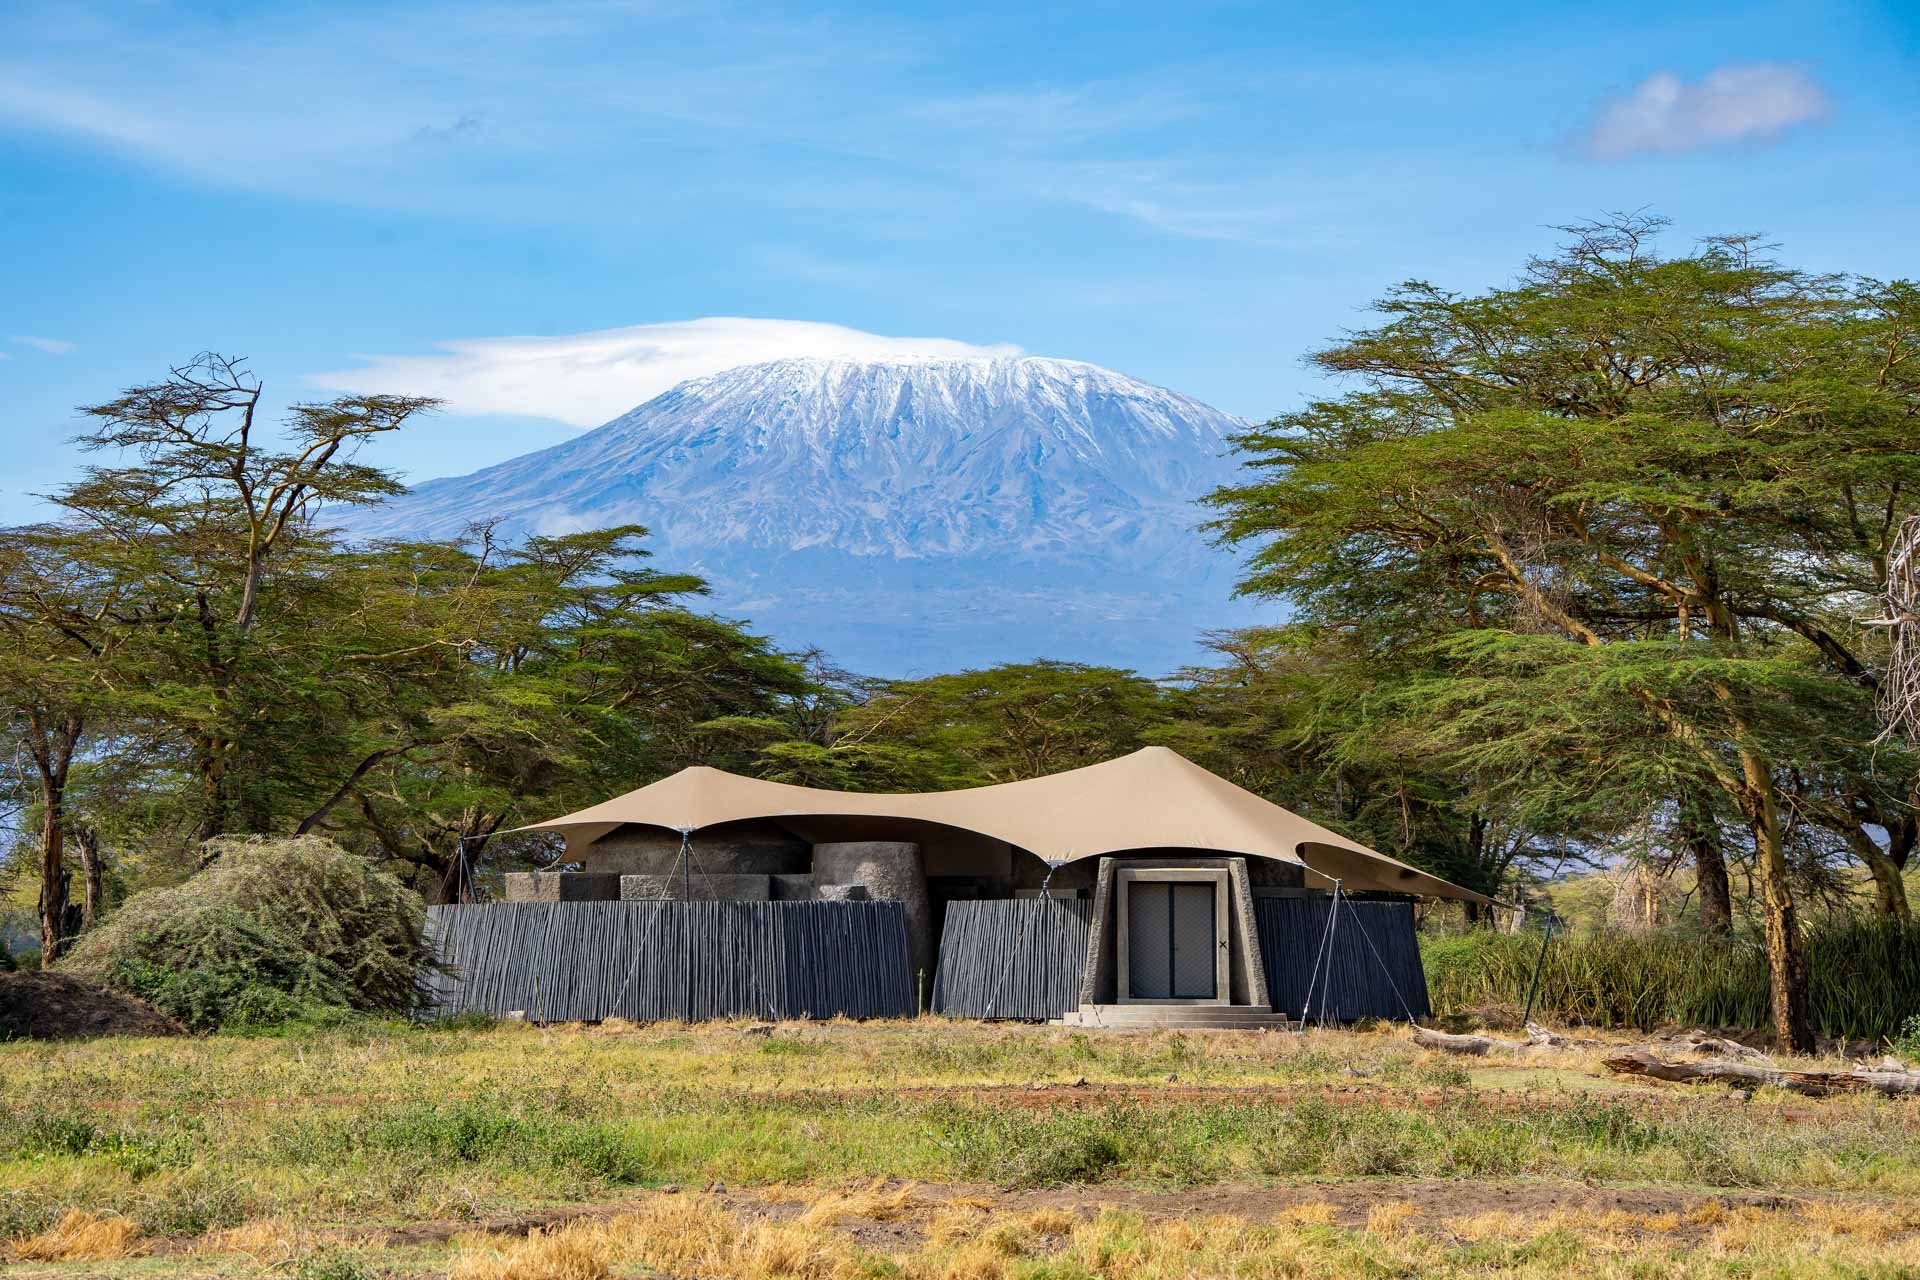 Angama Amboseli's suites have been carefully placed amongst the trees